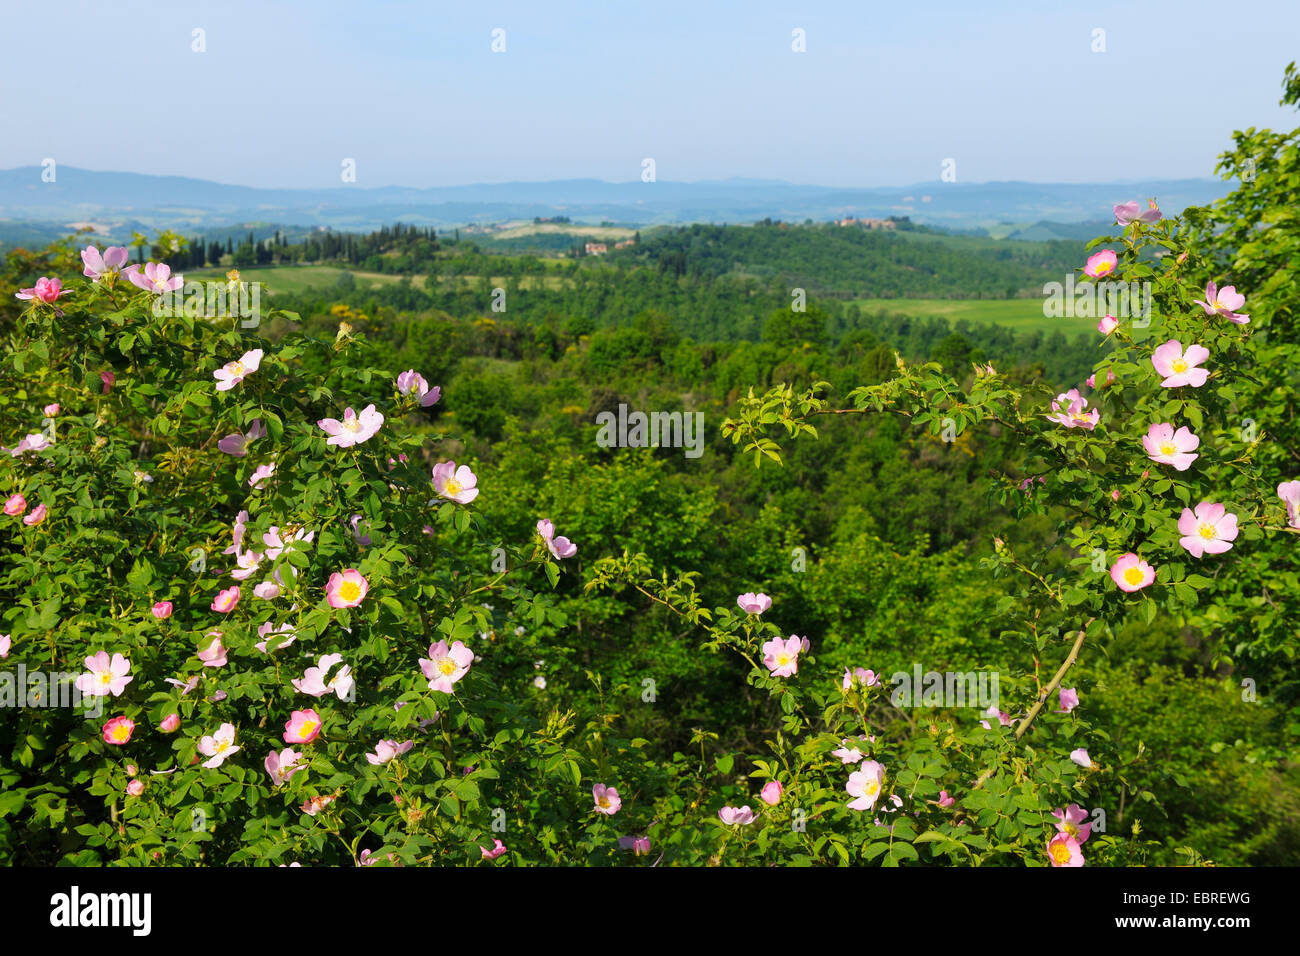 rose (Rosa spec.), blooming wild rose in front of hilly forest and meadow landscape in spring, Italy, Tuscany, Siena Stock Photo